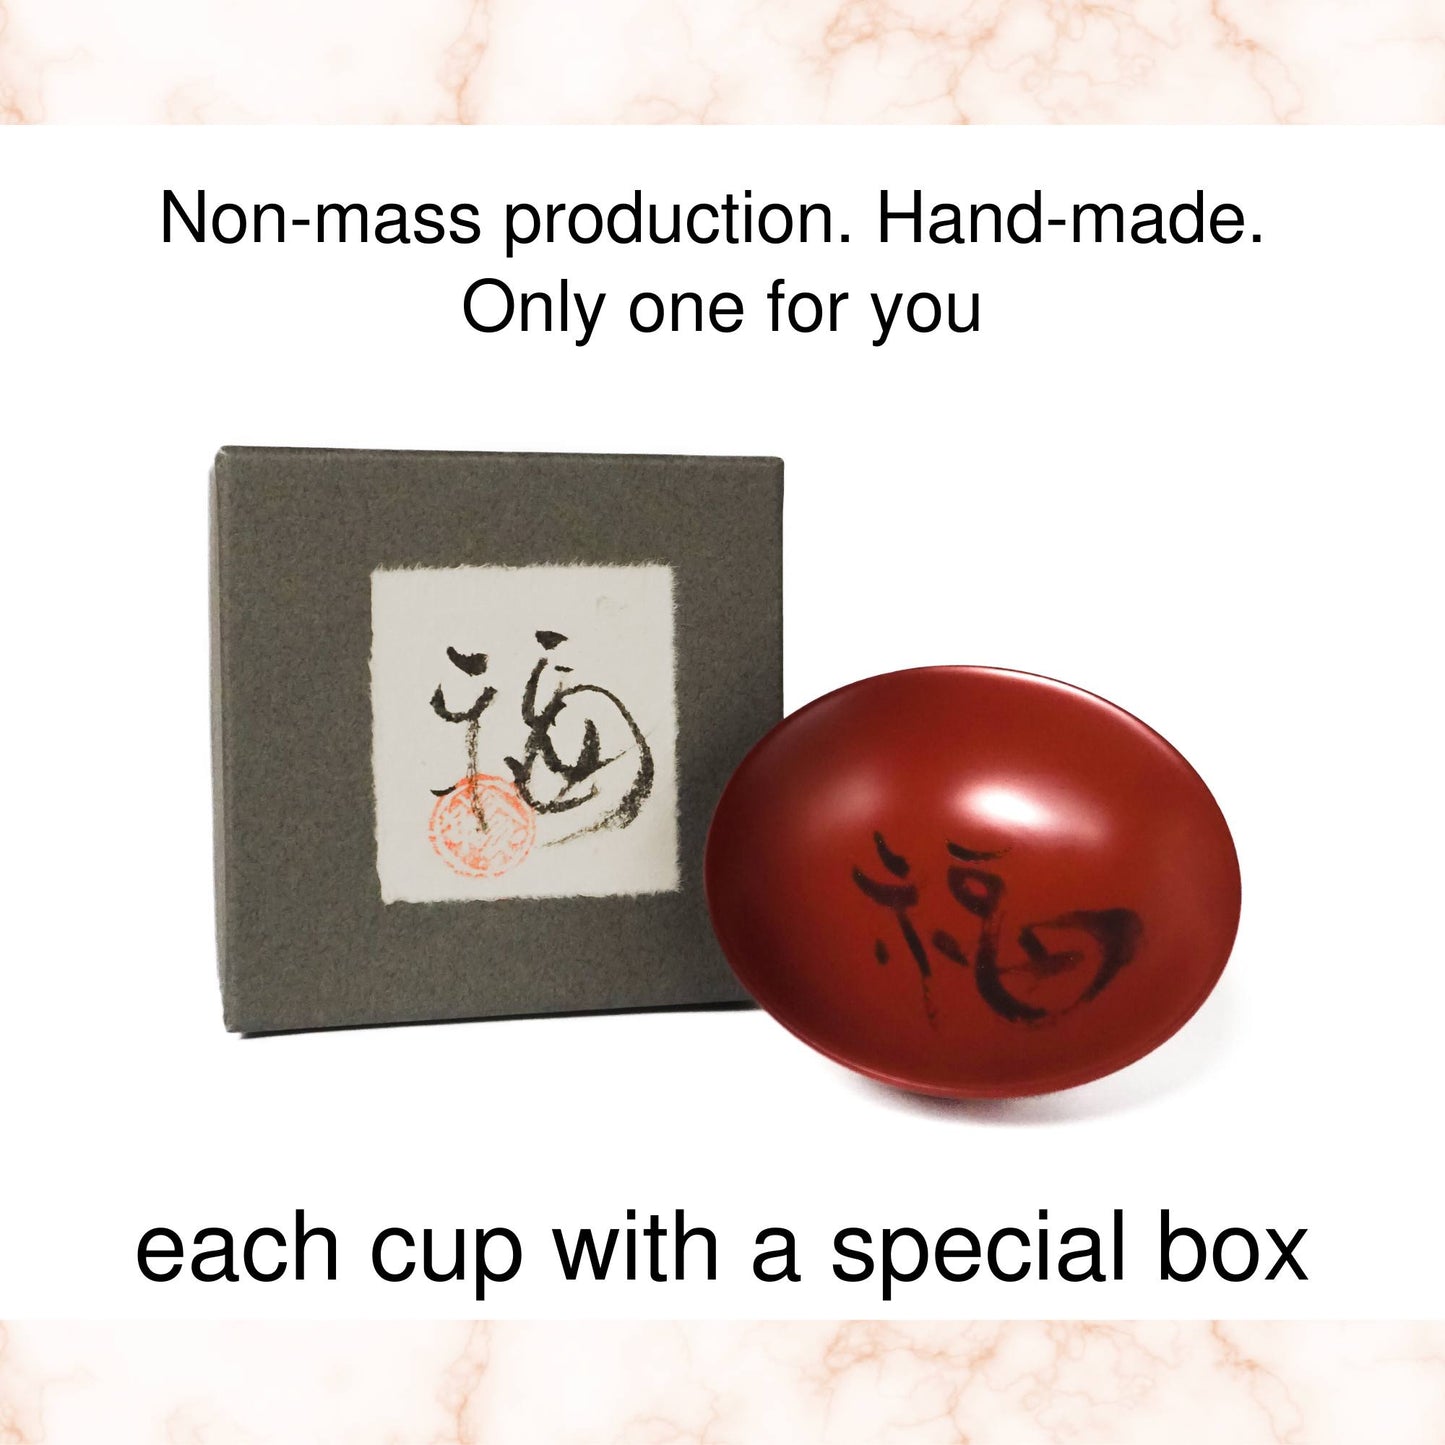 5 Sets of Traditional Lacquered Sake Cup Decorated with an Auspicious Omen - Made by Master Yagi